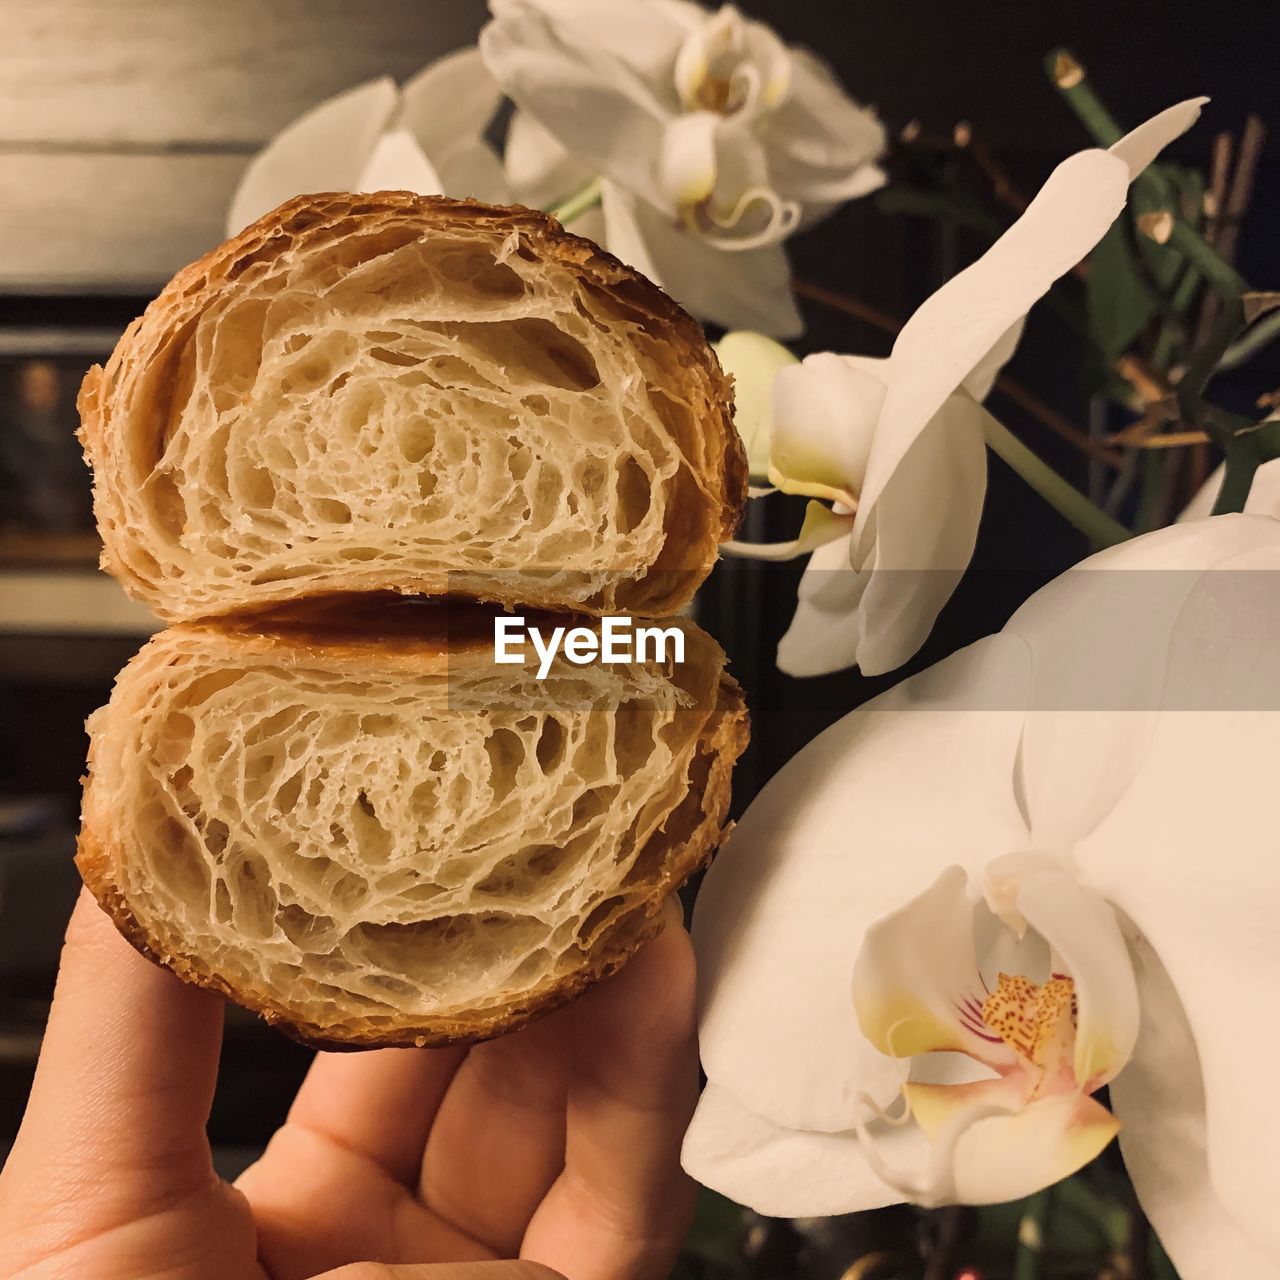 Eat croissant and be happy